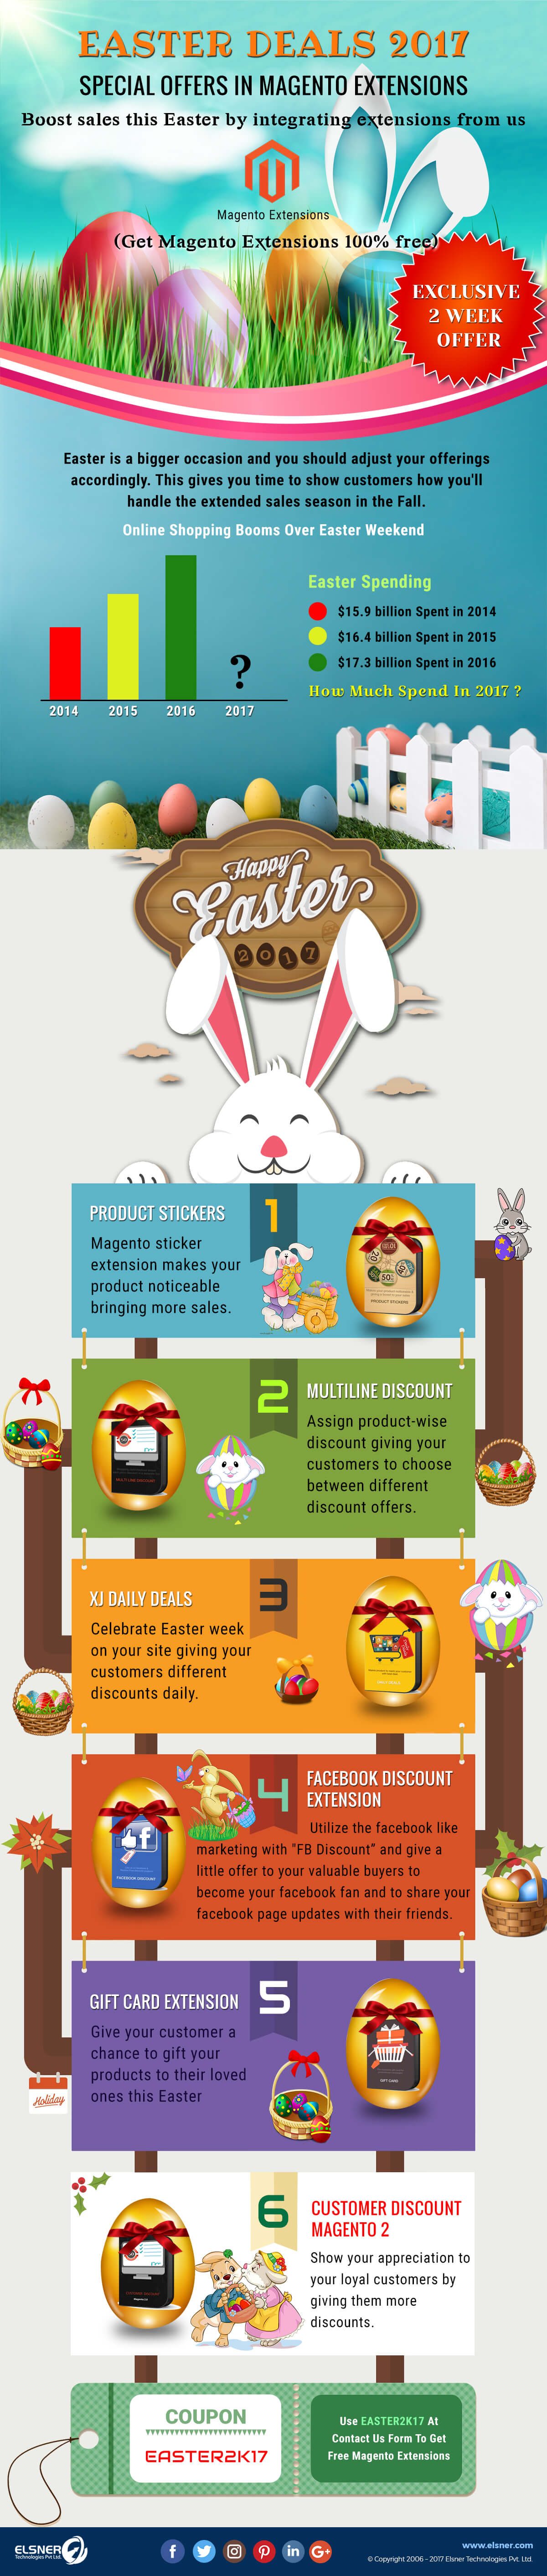 Easter Treat: Get Sales Booster Premium Magento Extensions Free